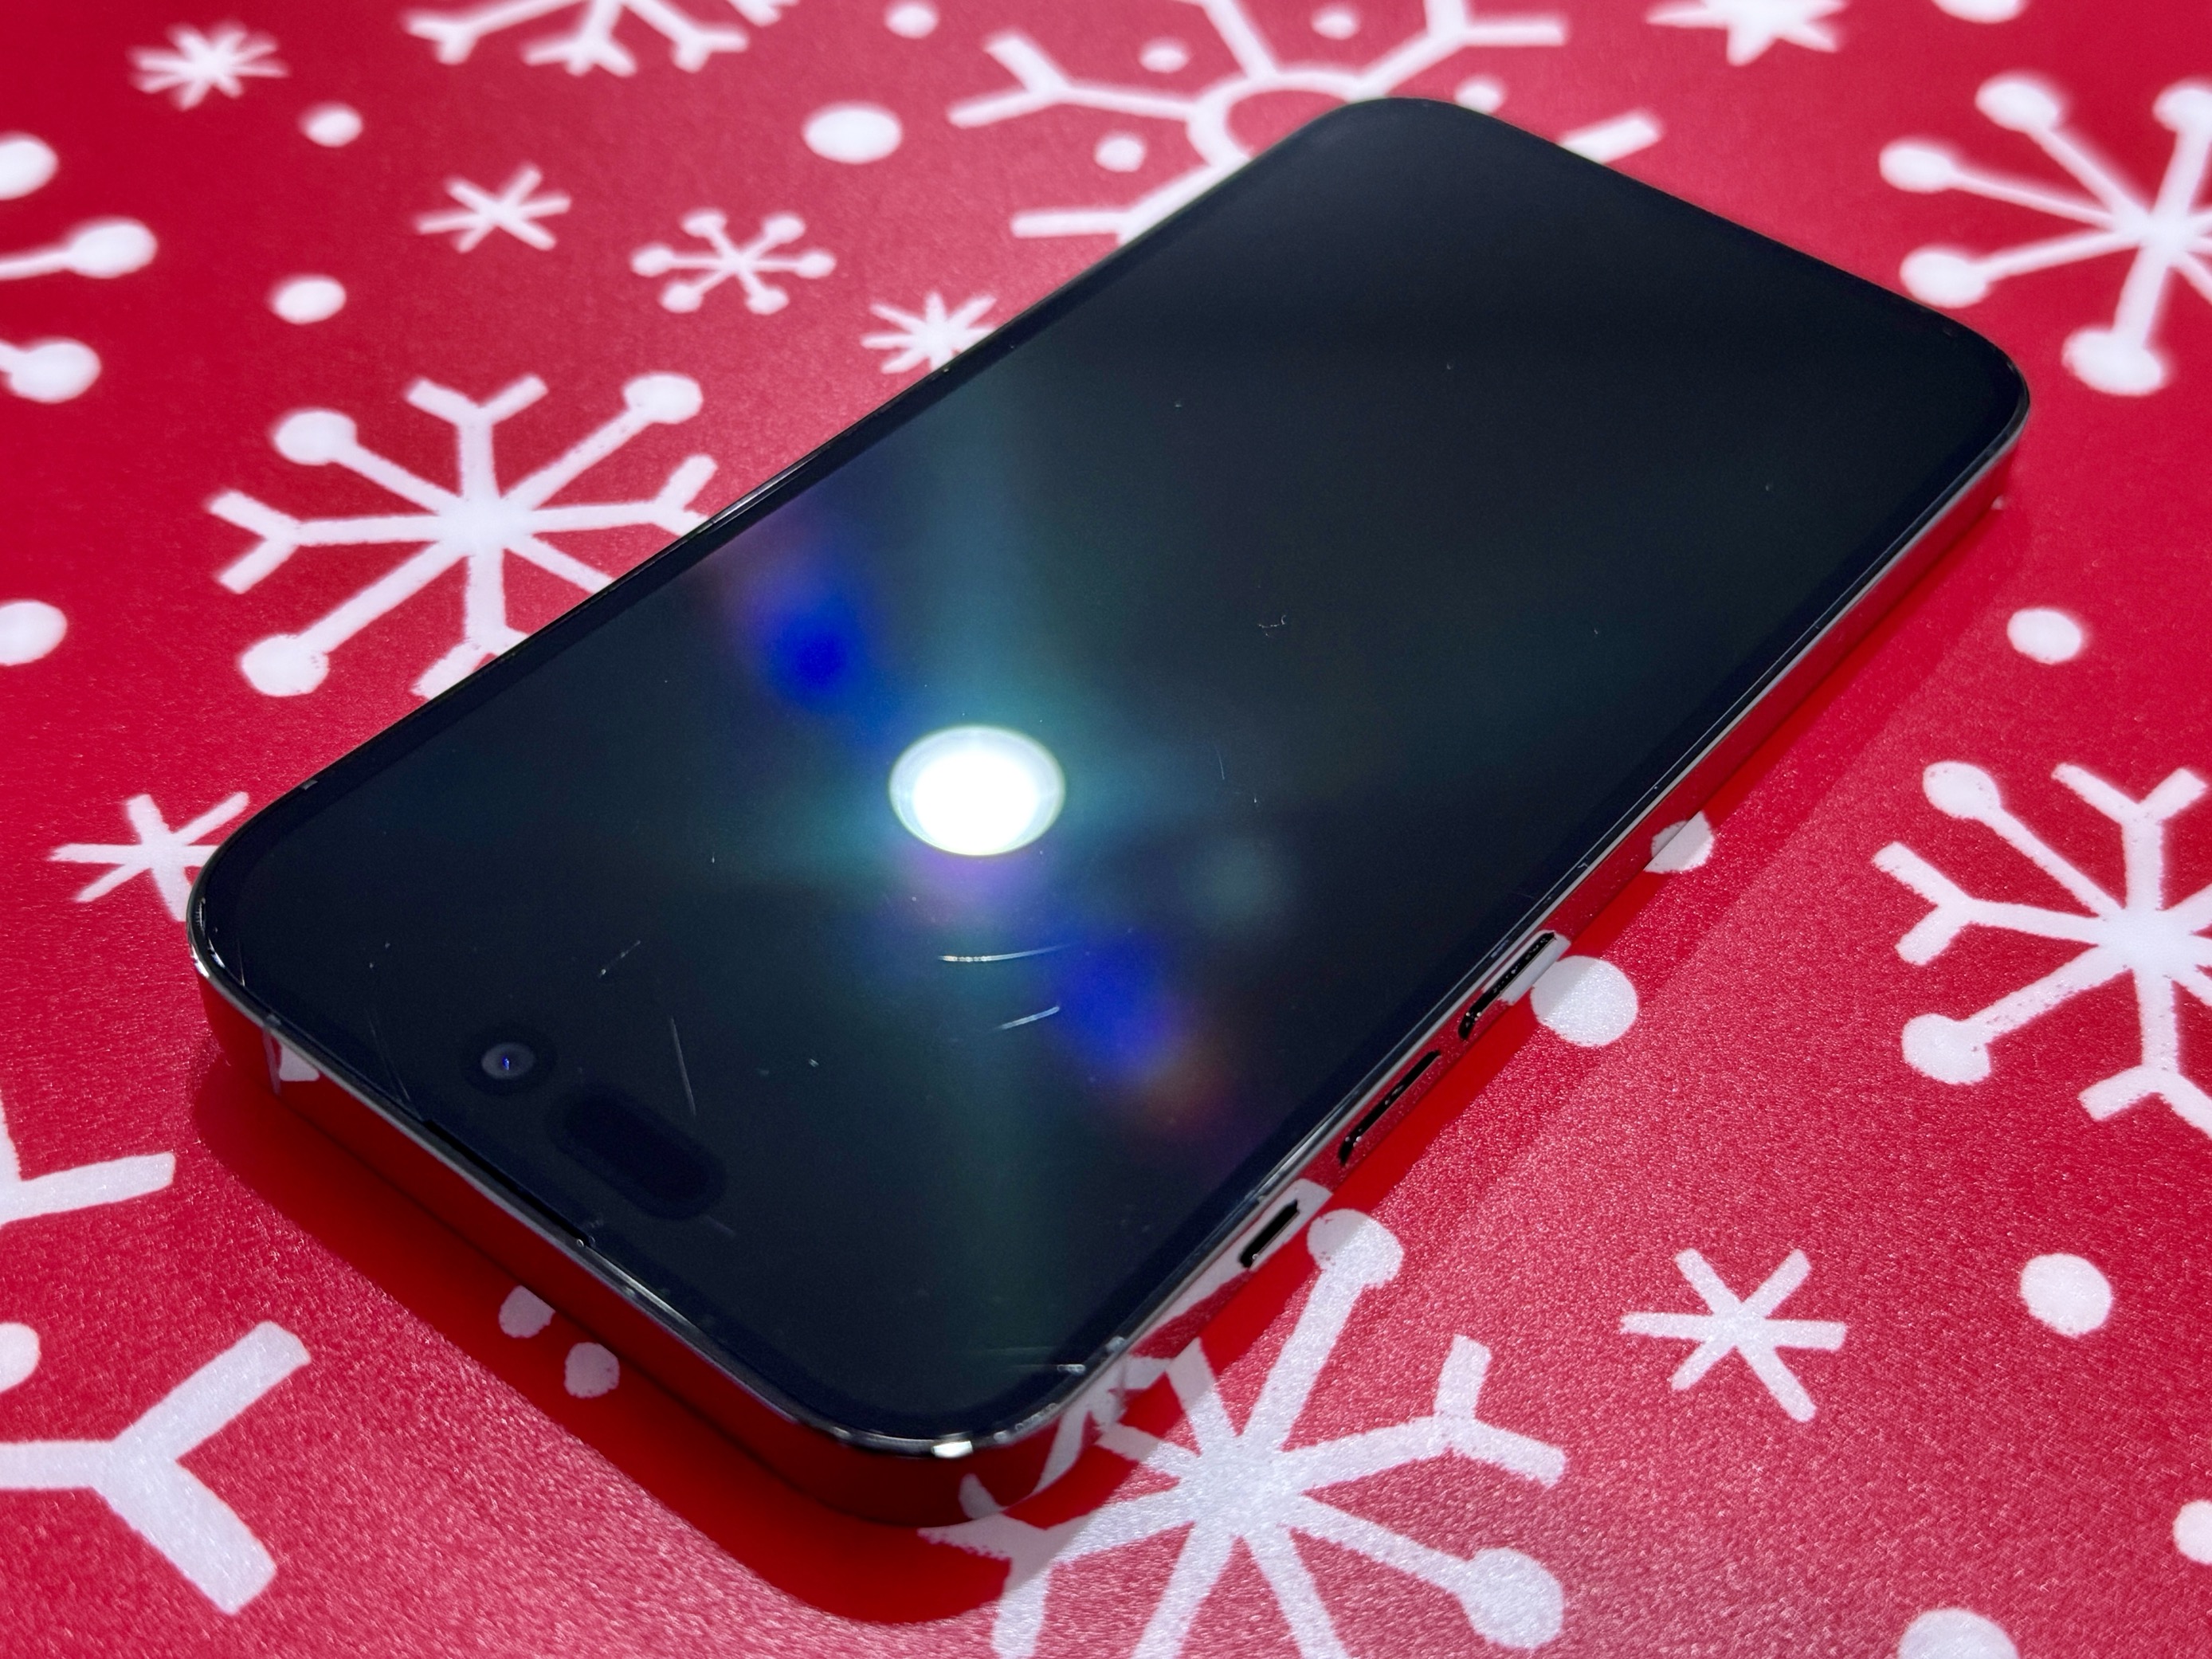 A picture of an iPhone 14 Pro, showing various scratches on its screen.